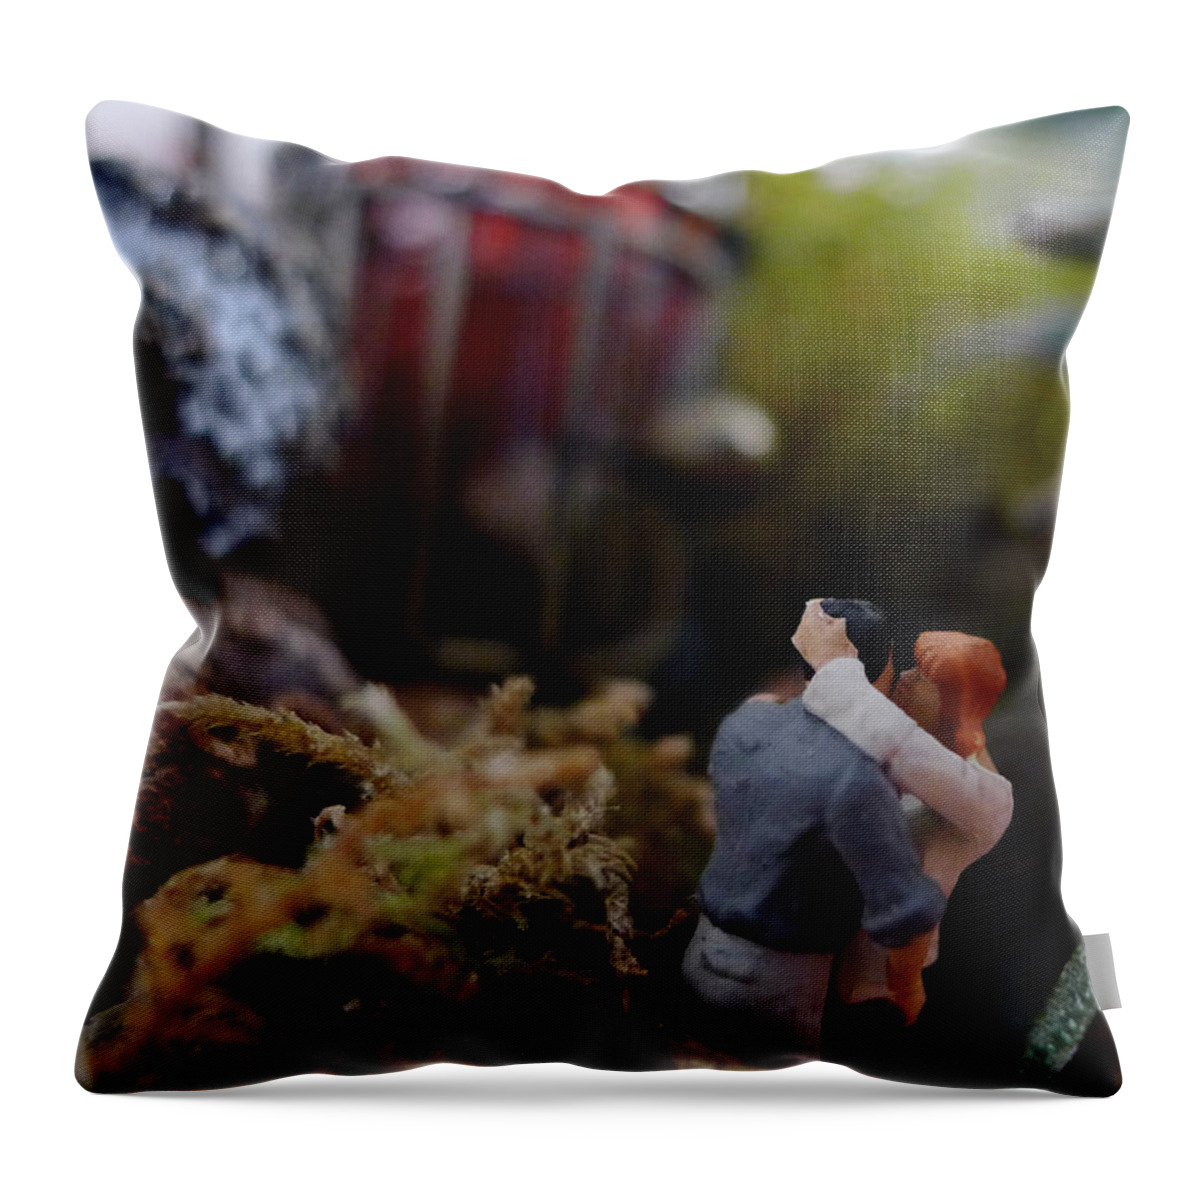 Secret Throw Pillow featuring the photograph Small World - Alone Together by Richard Reeve